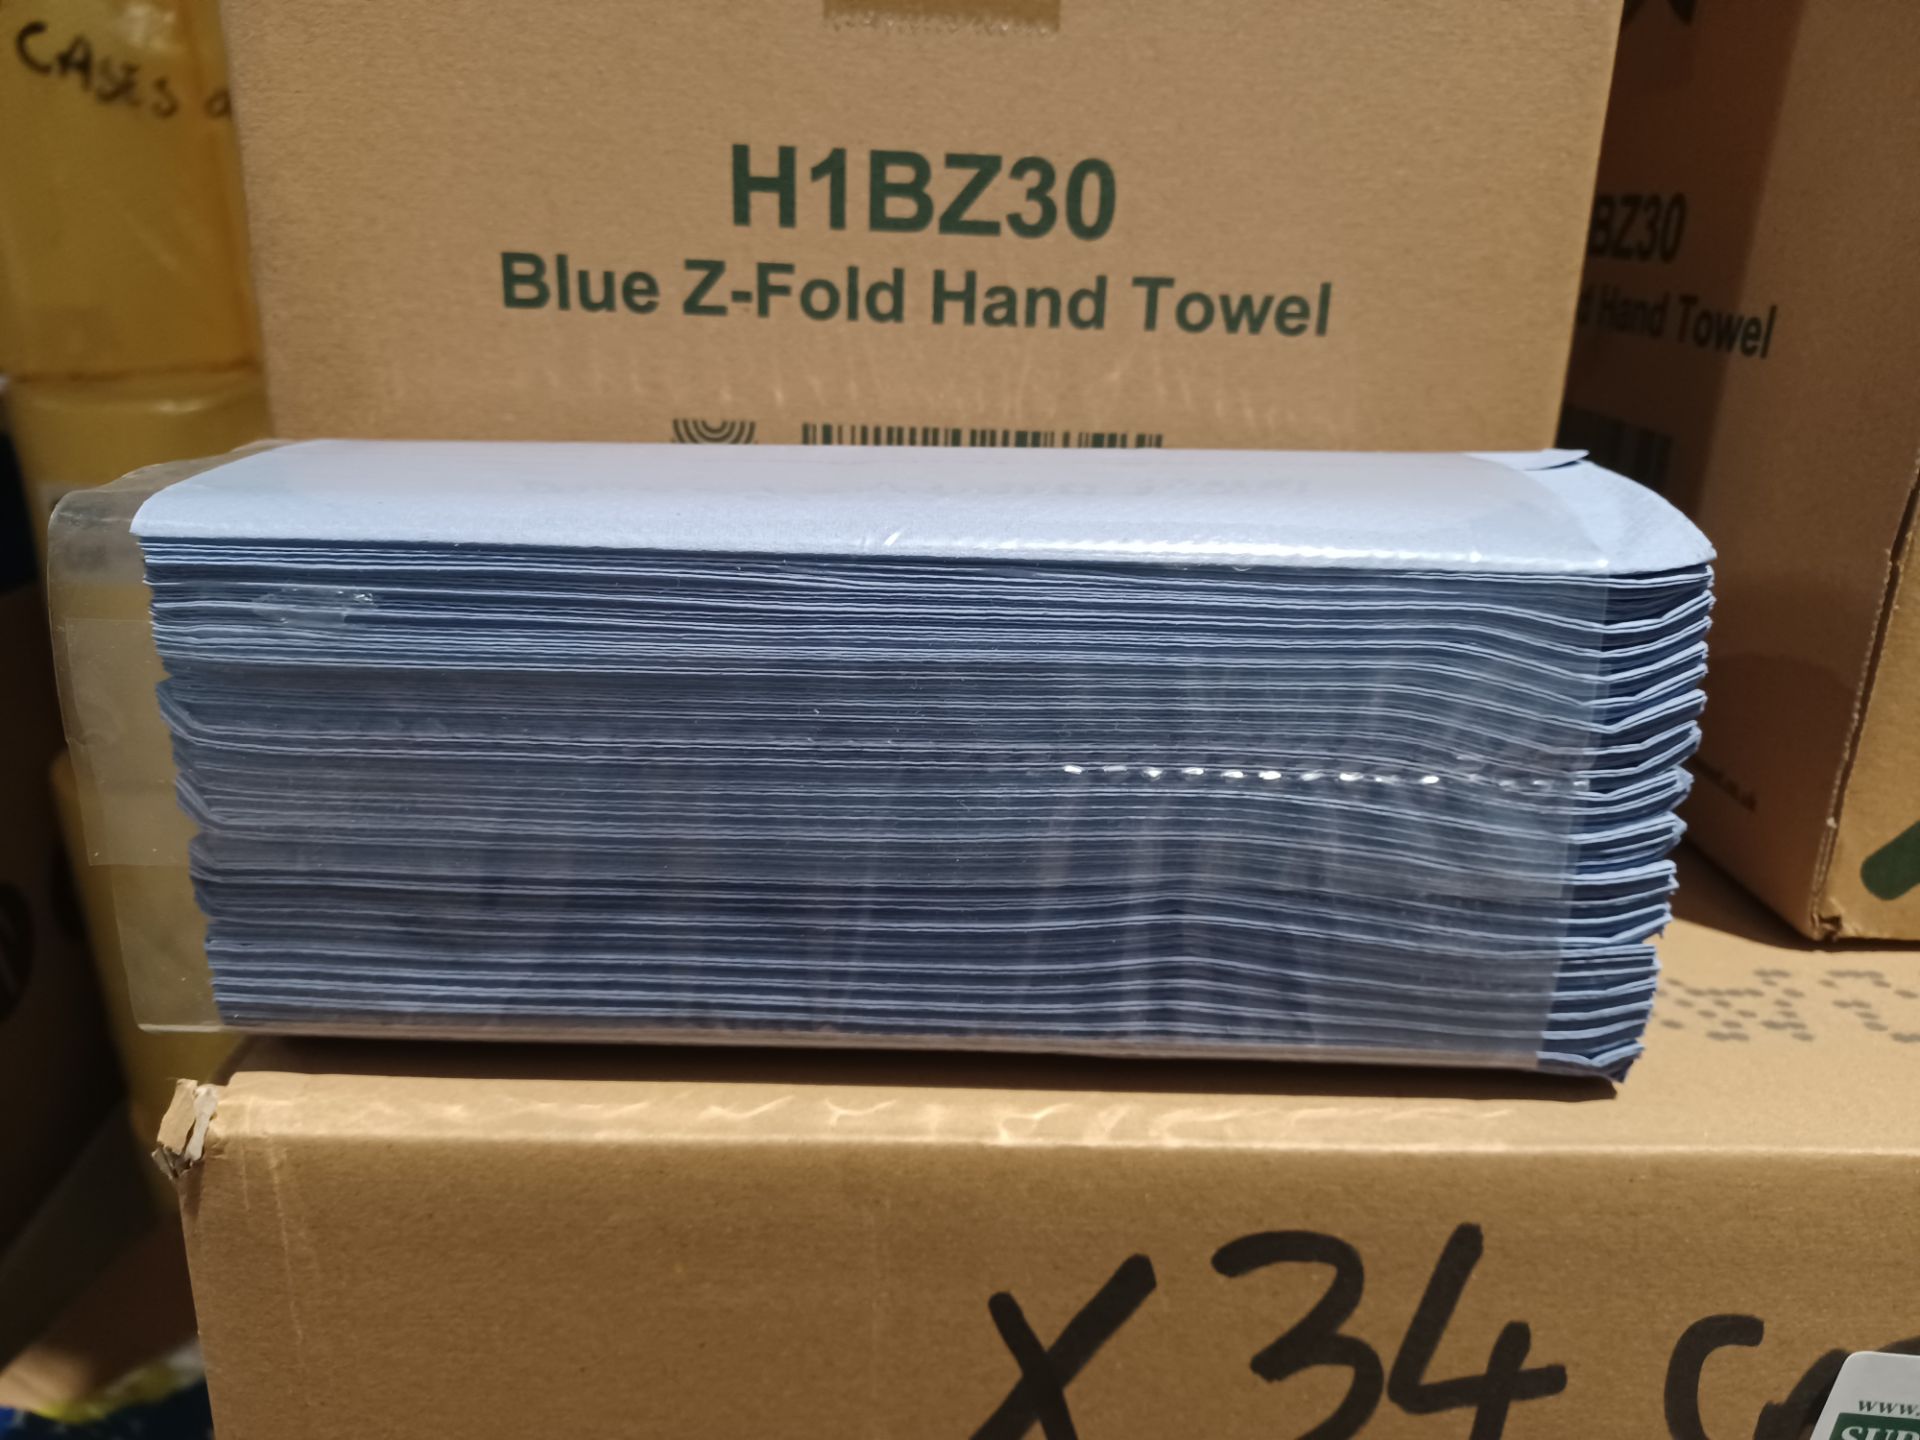 7 X BRAND NEW PACKS OF 12 BLUE Z-FOLD HAND TOWELS R3-2